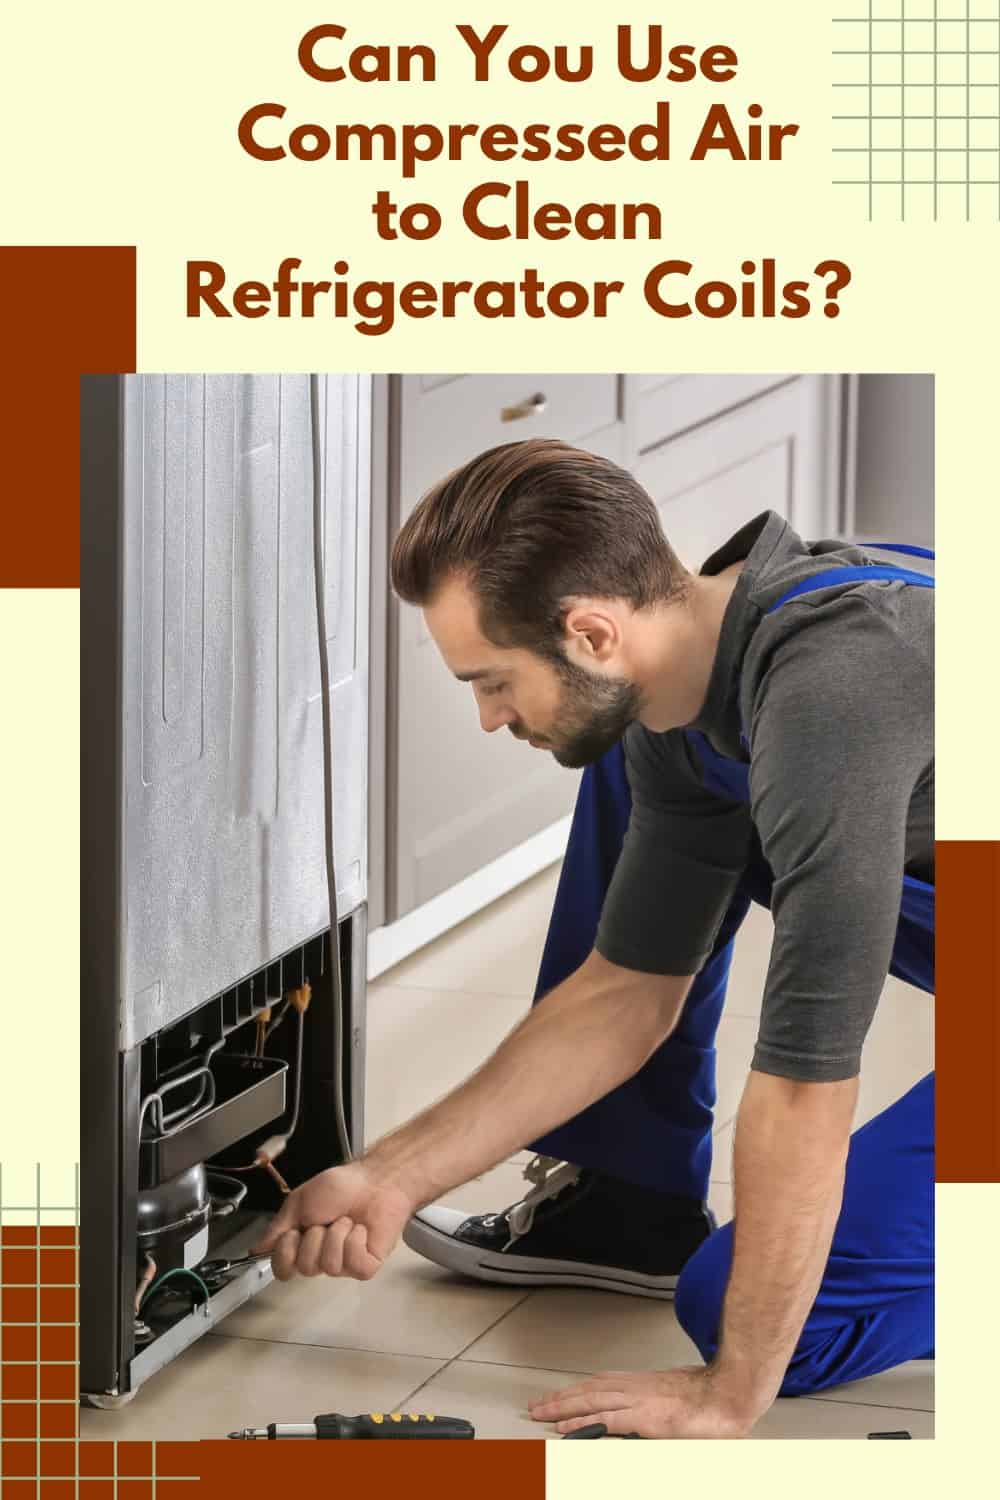 Yes, you can use compressed air on refrigerator coils